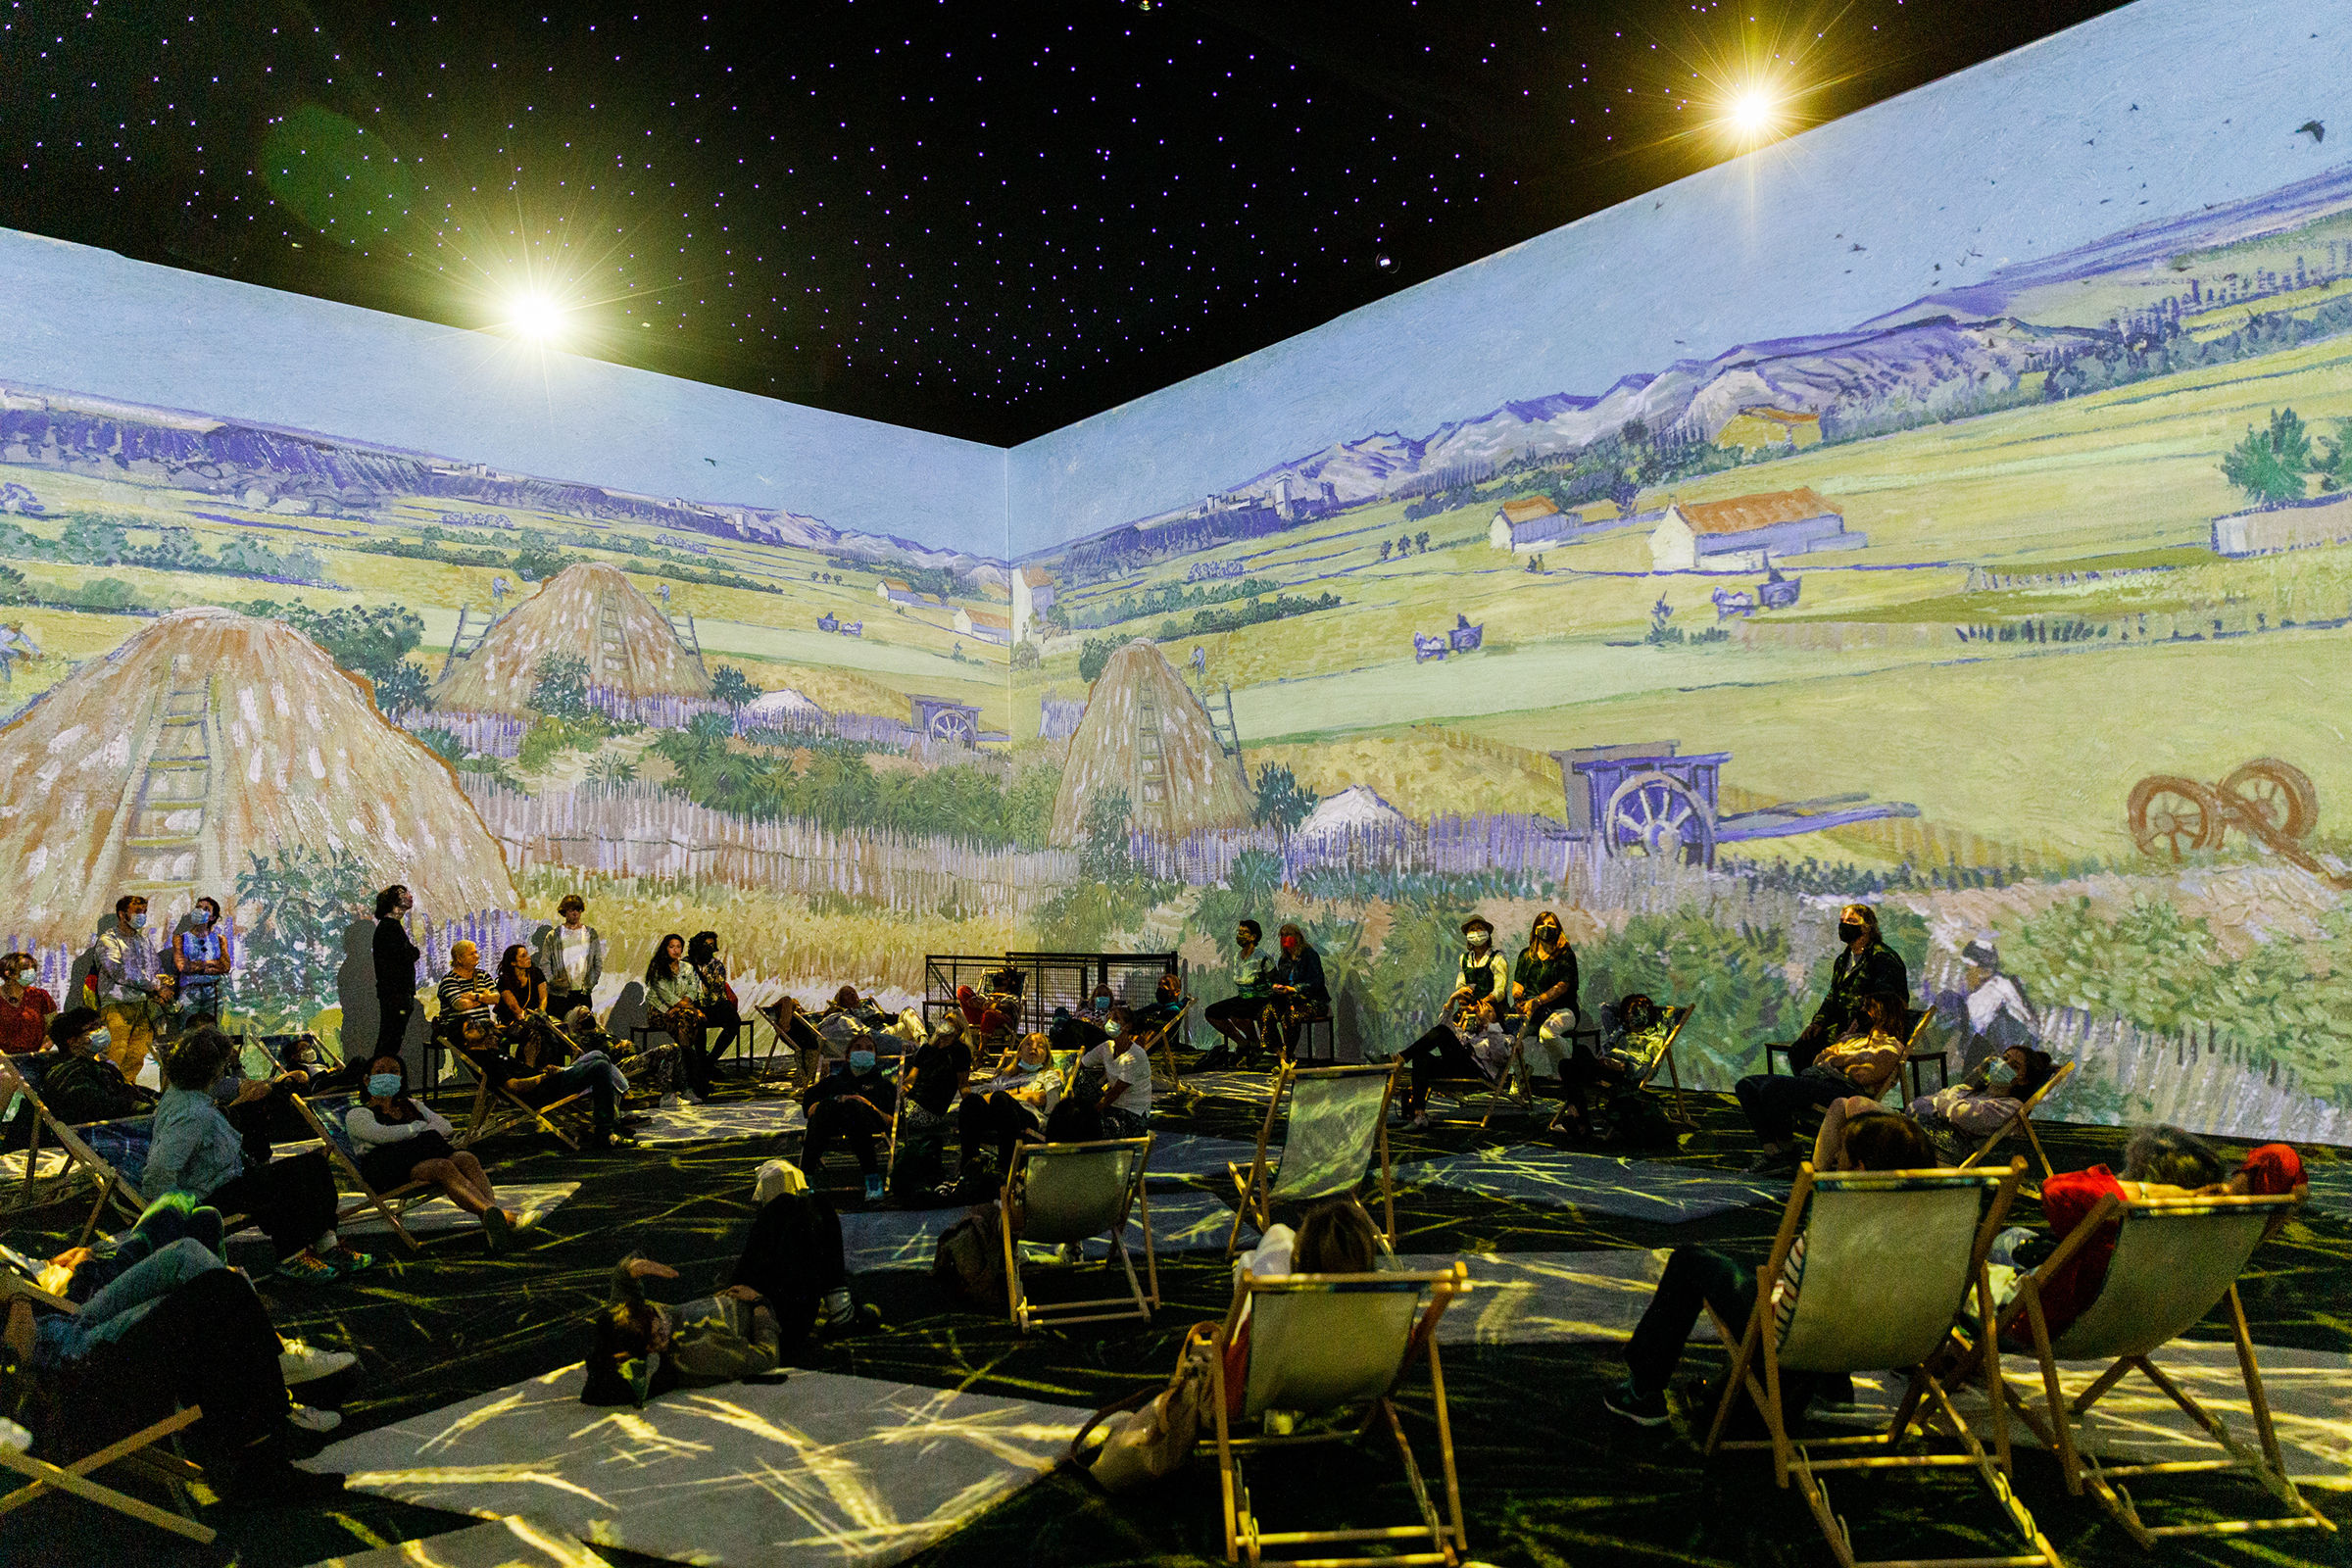 REVIEW: Van Gogh: The Immersive Experience, London 1